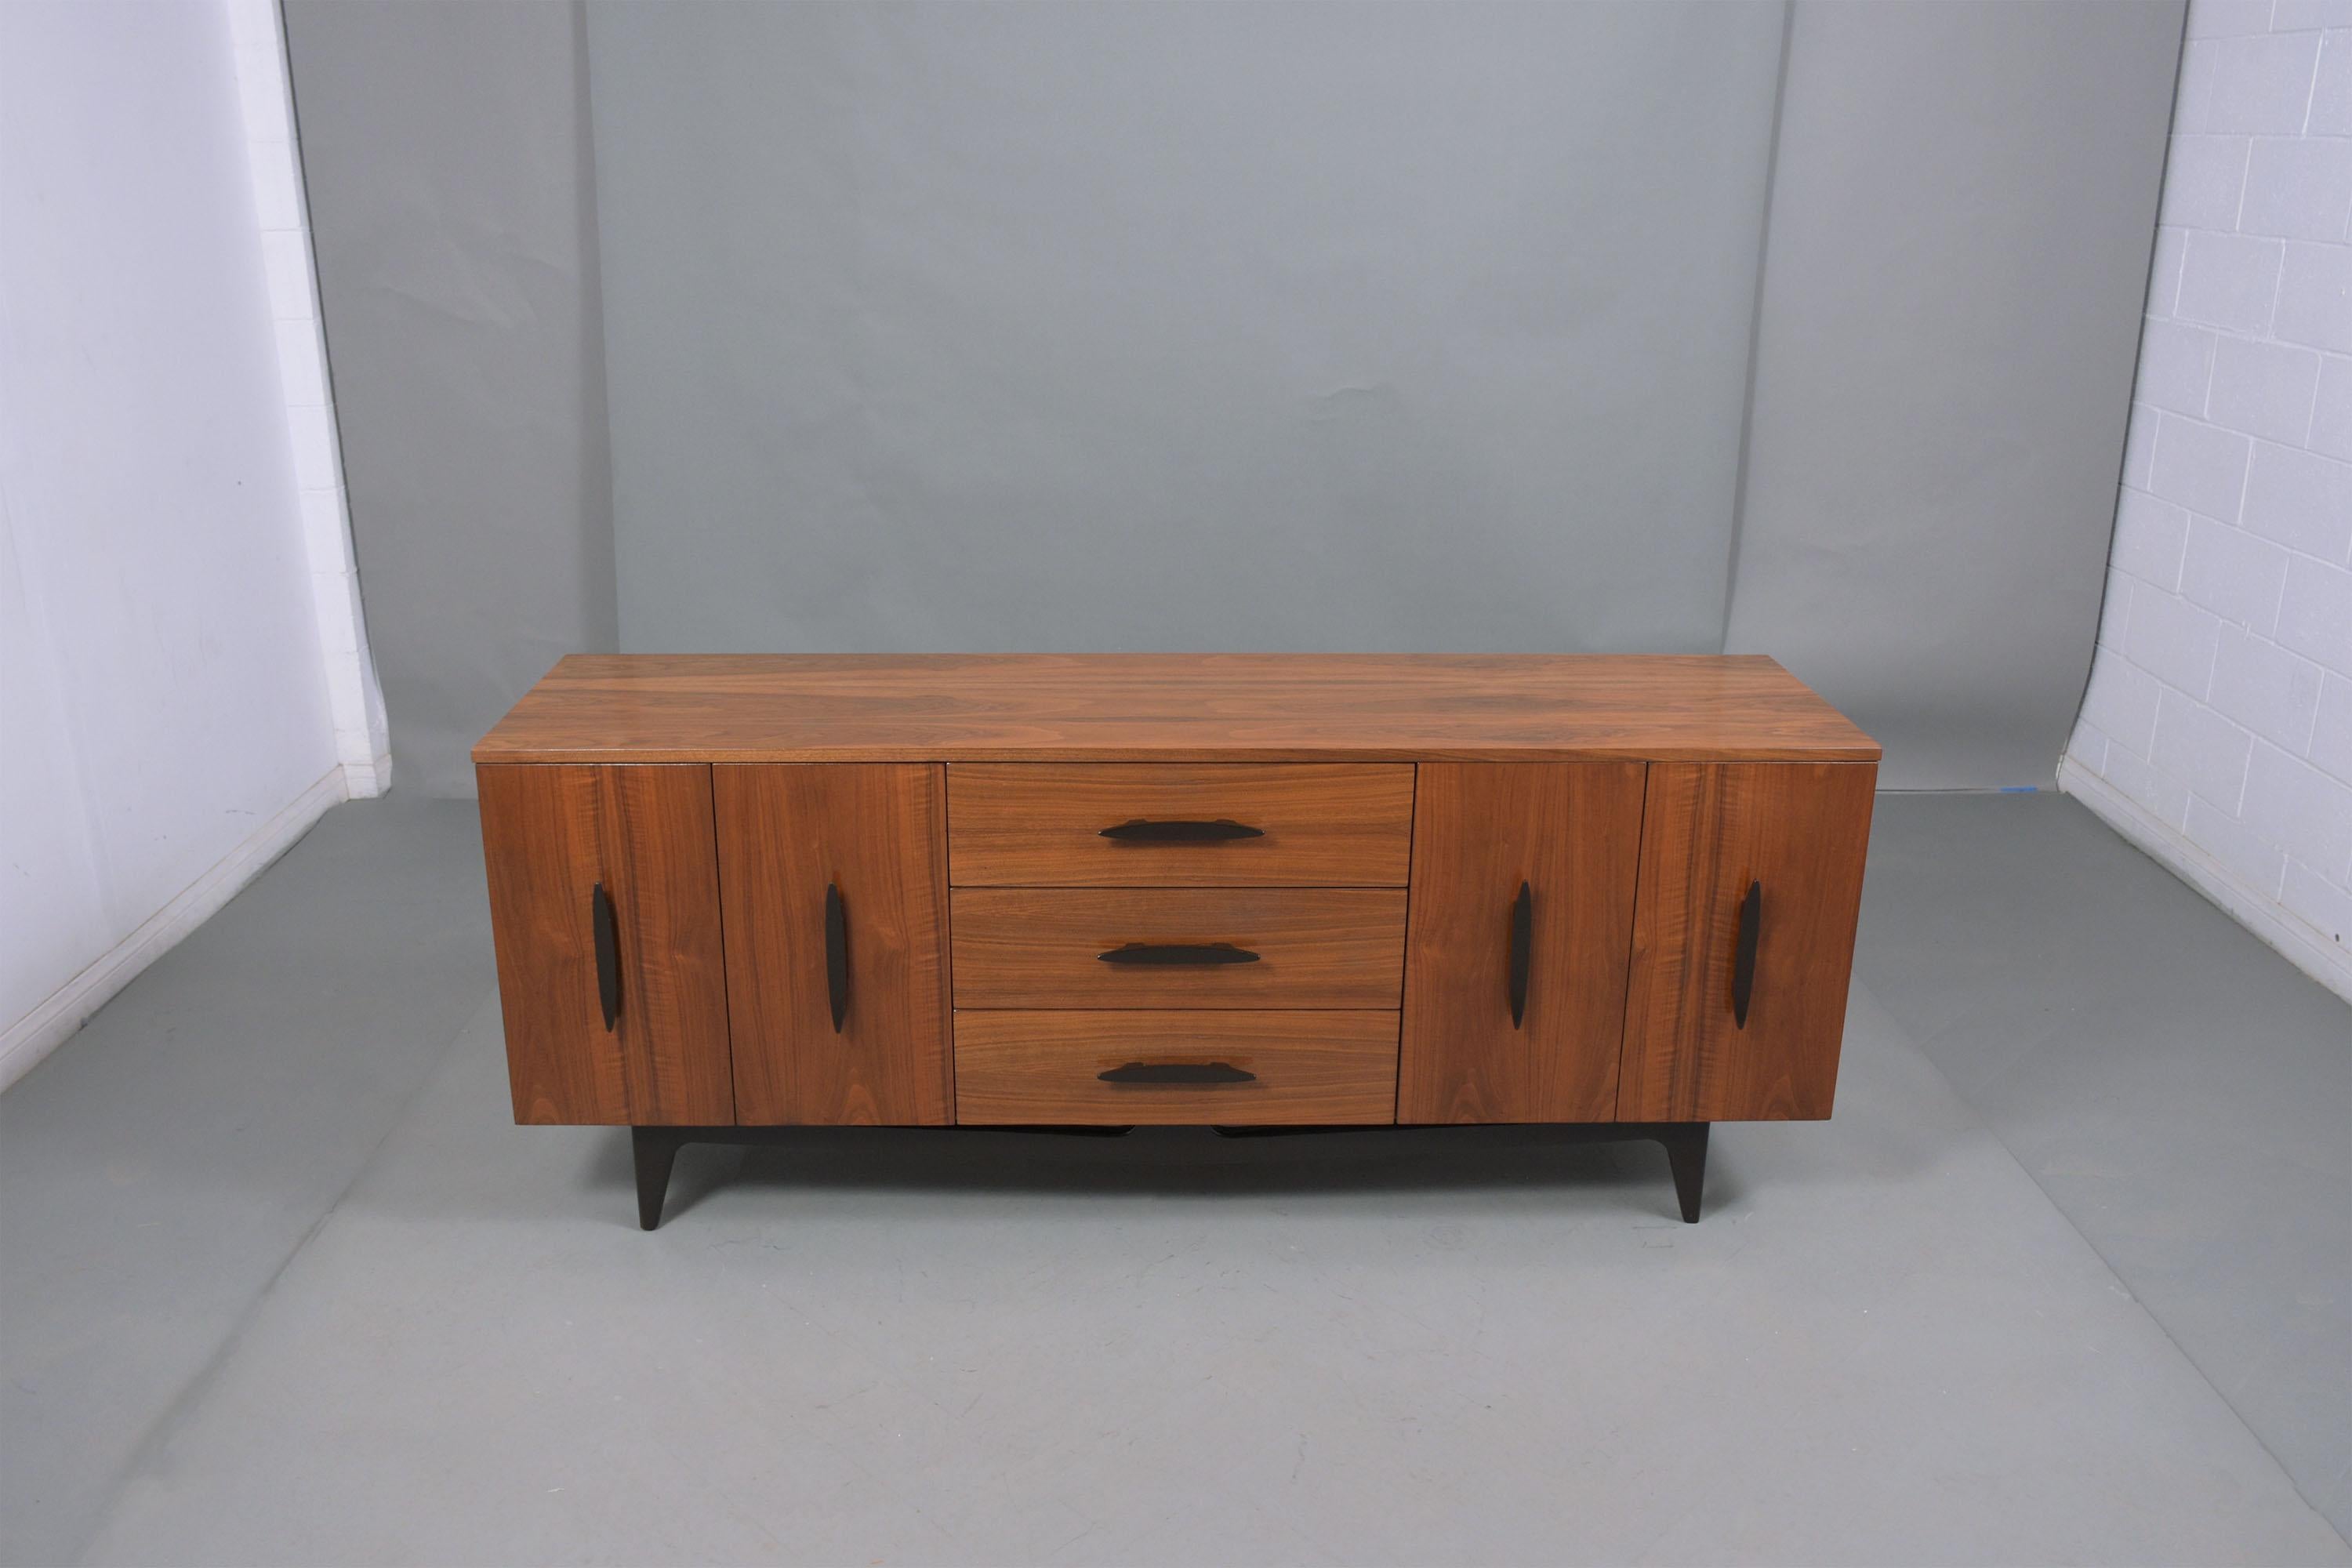 This 1960s mid-century walnut credenza is made out of walnut wood that has been stained in a walnut & ebonized color combination with a newly lacquered finish and fully restored by our craftsmen. The chest of drawers has three drawers down the